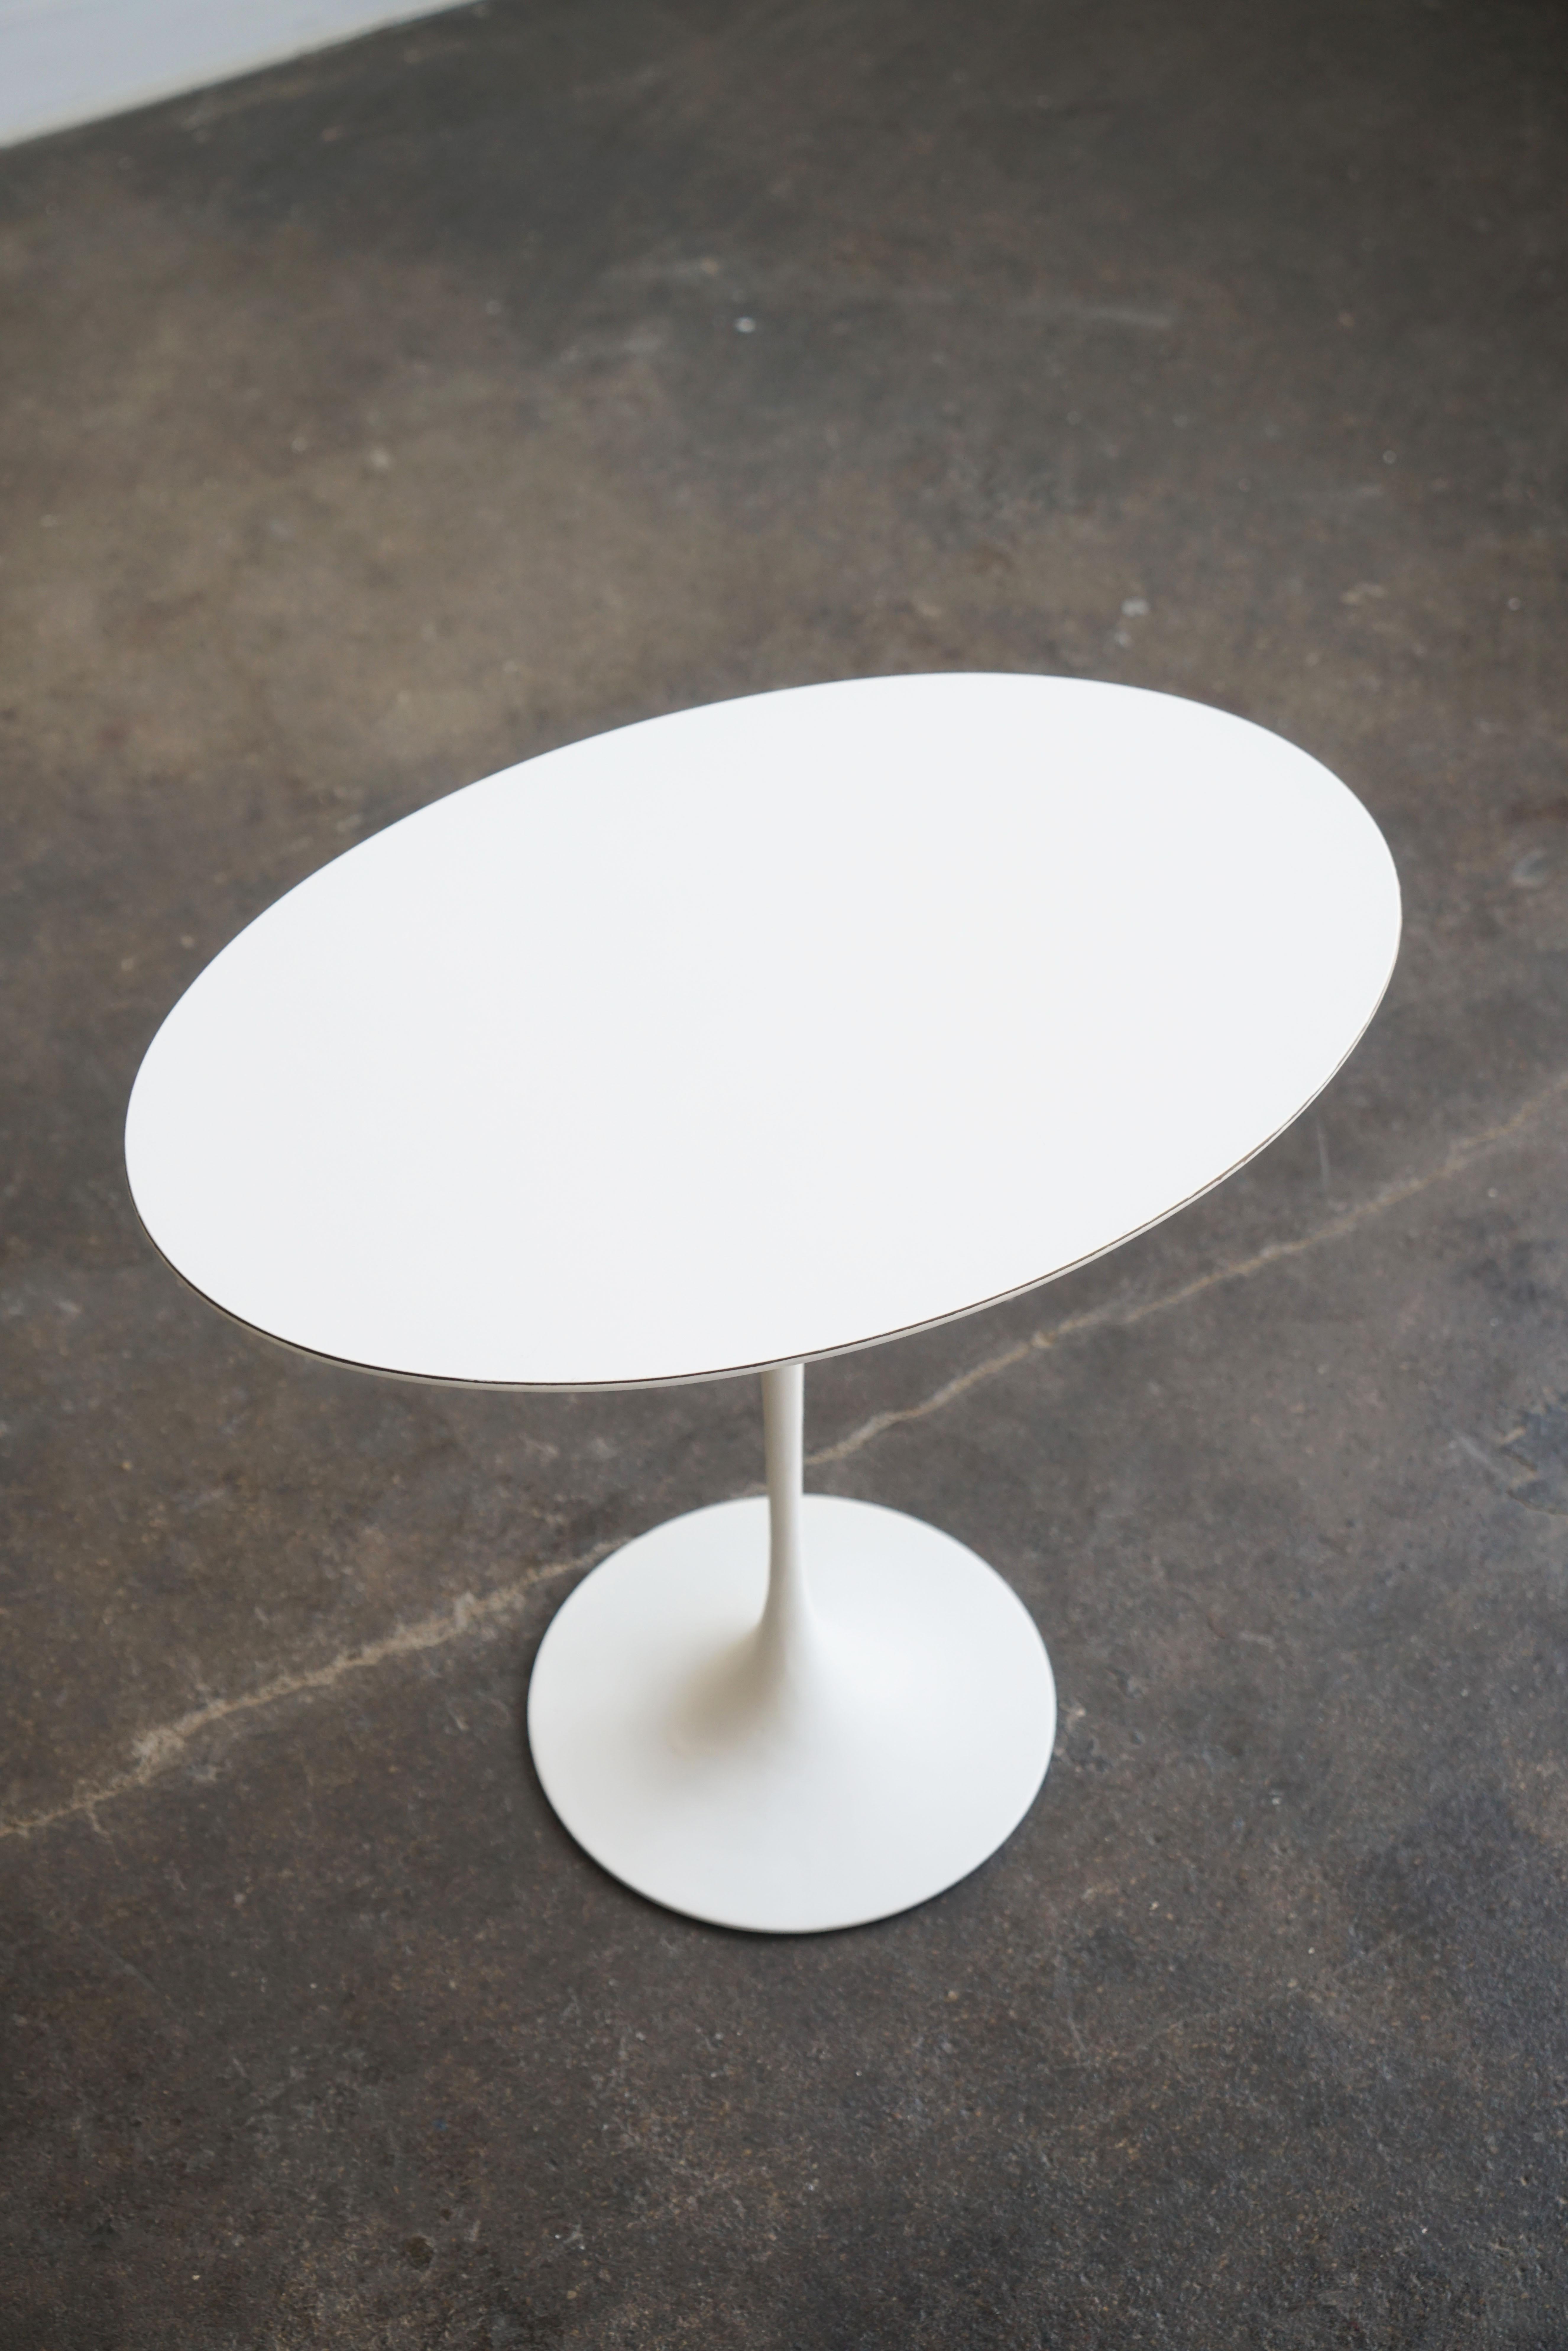 Laminate Very early Eero Saarinen for Knoll Tulip table, oval shaped top circa 1957 For Sale